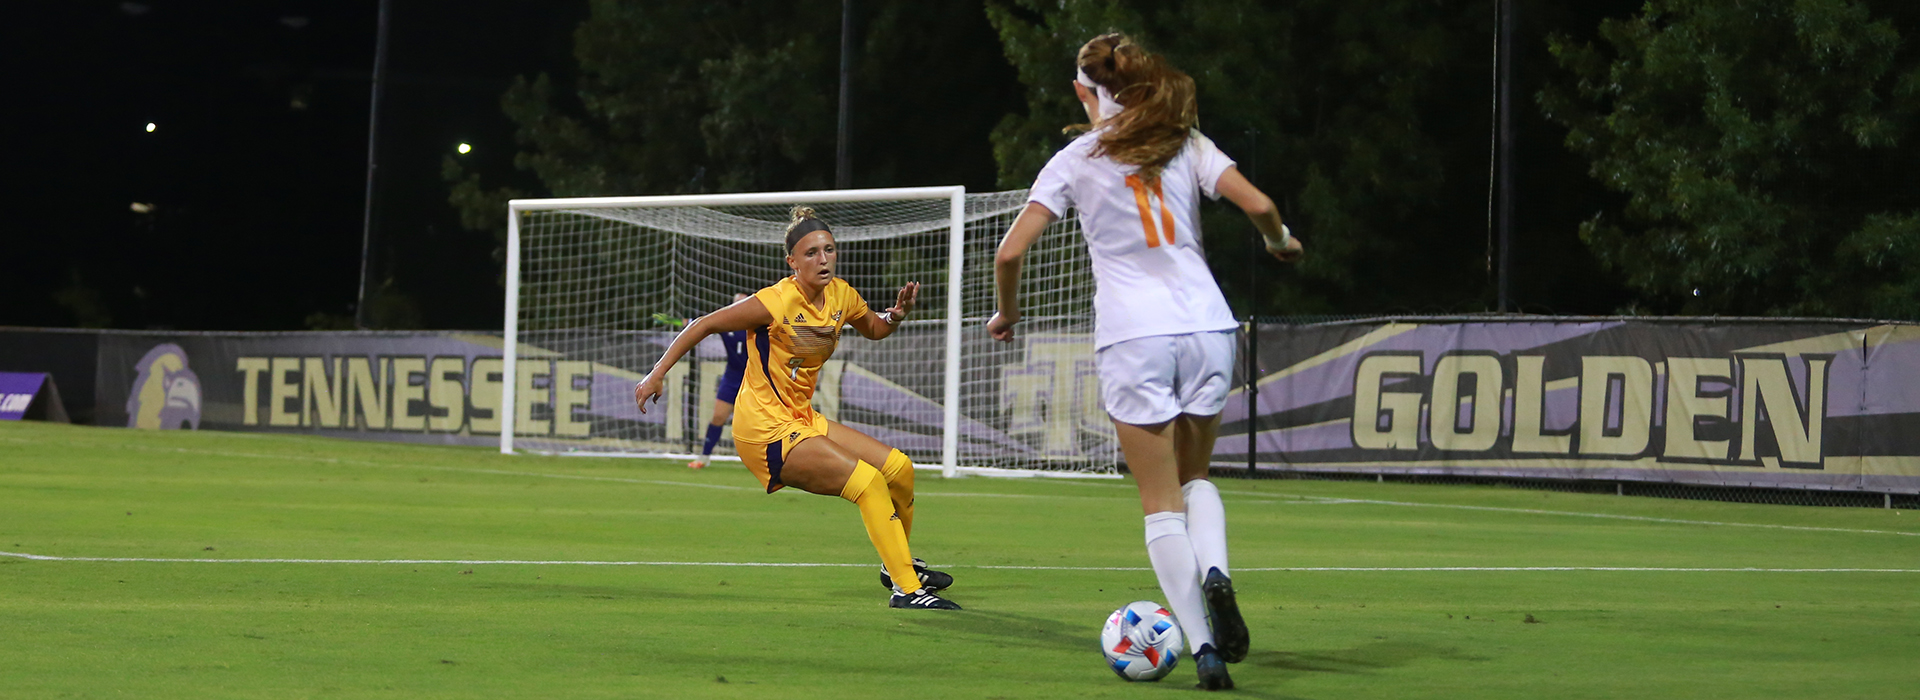 Tech tripped up by No. 17 Tennessee